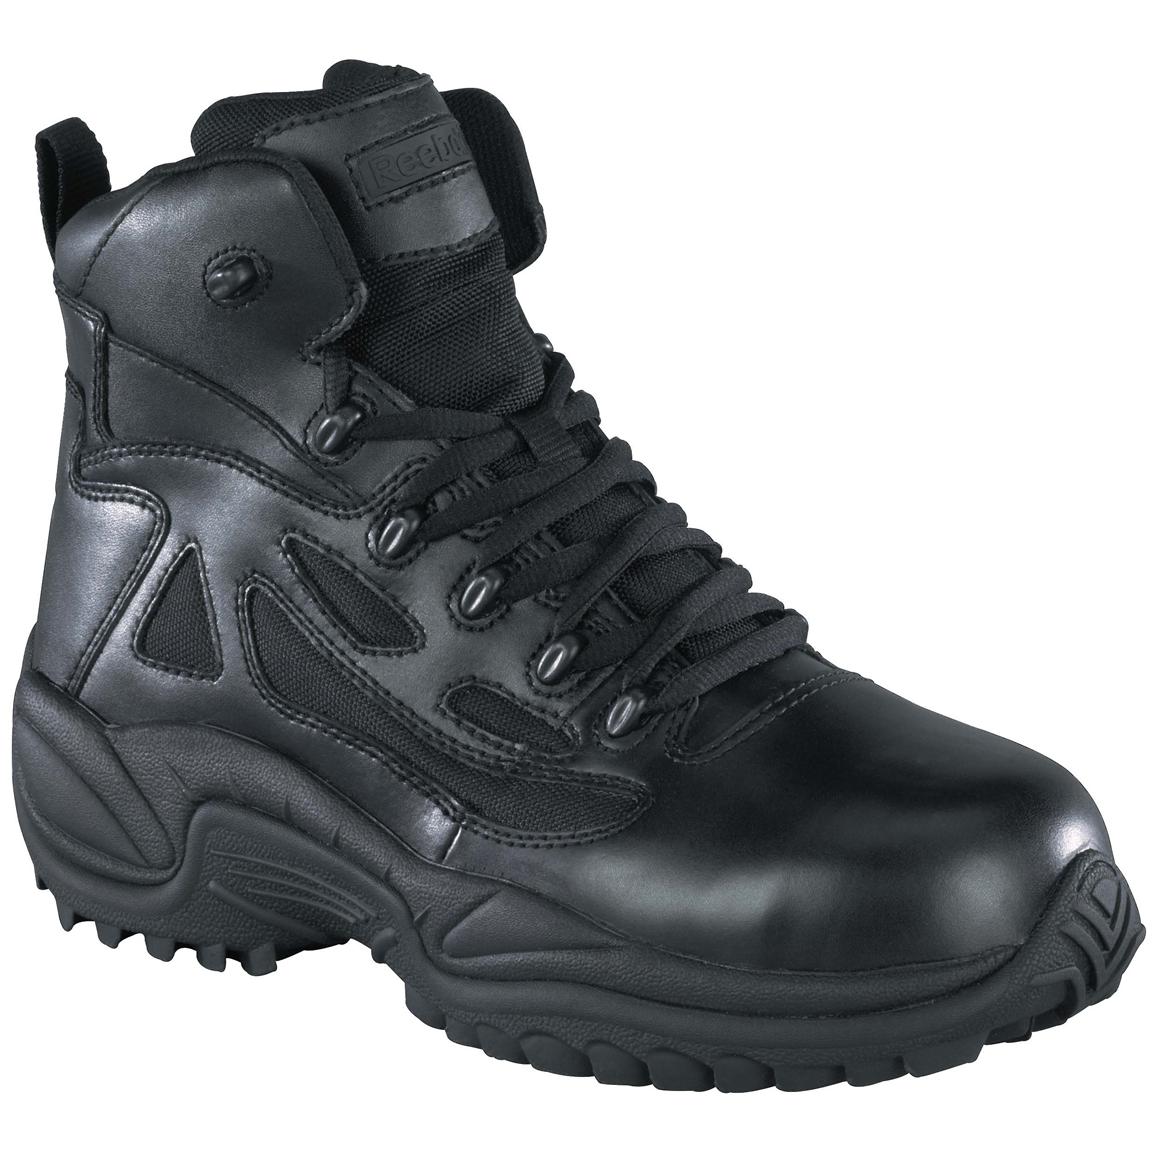 Women's Reebok® Composite Toe 6 inch Stealth Boots with Side Zip, Black